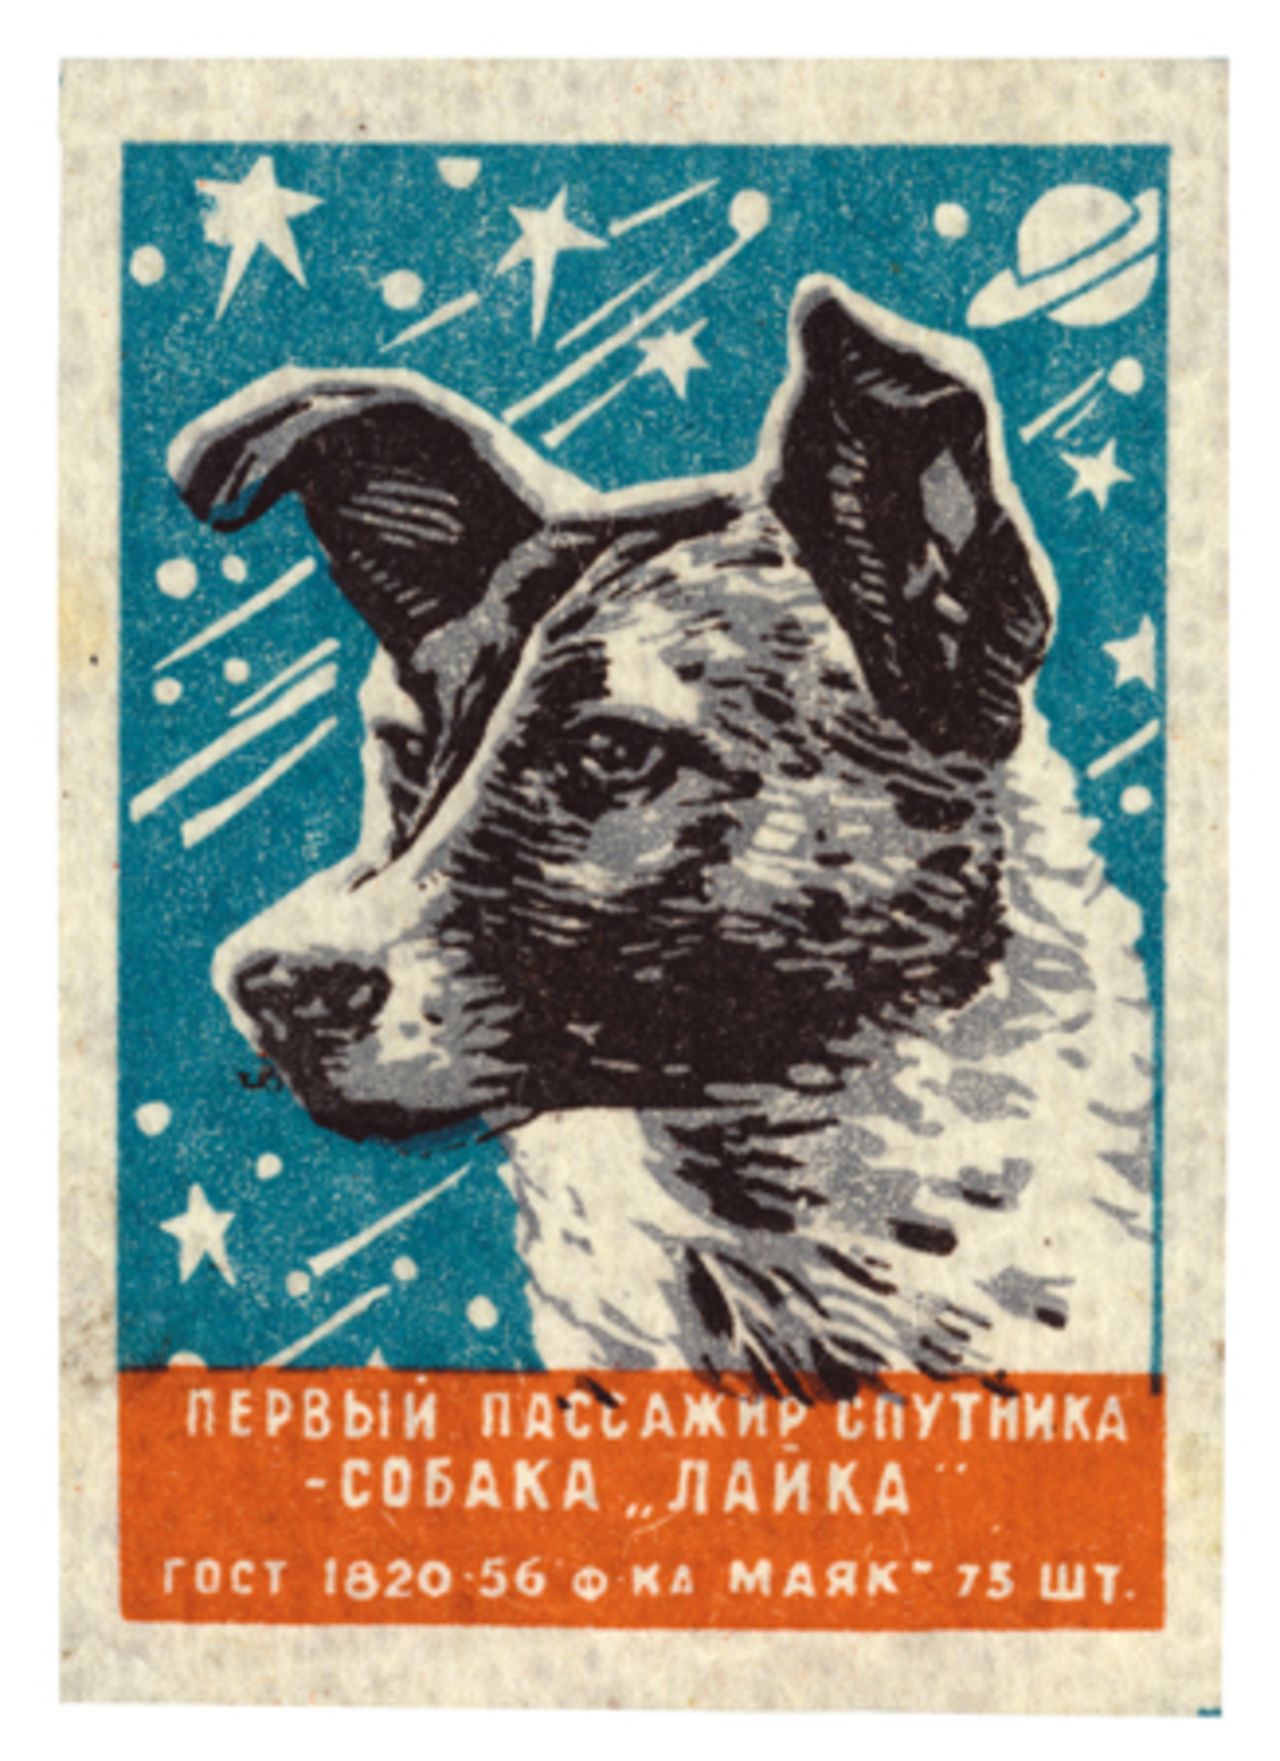  As one of many label designs celebrating the first living being in space, this Matchbox label from 1957 reads ''The First Sputnik Passenger -- the dog Laika'<br />